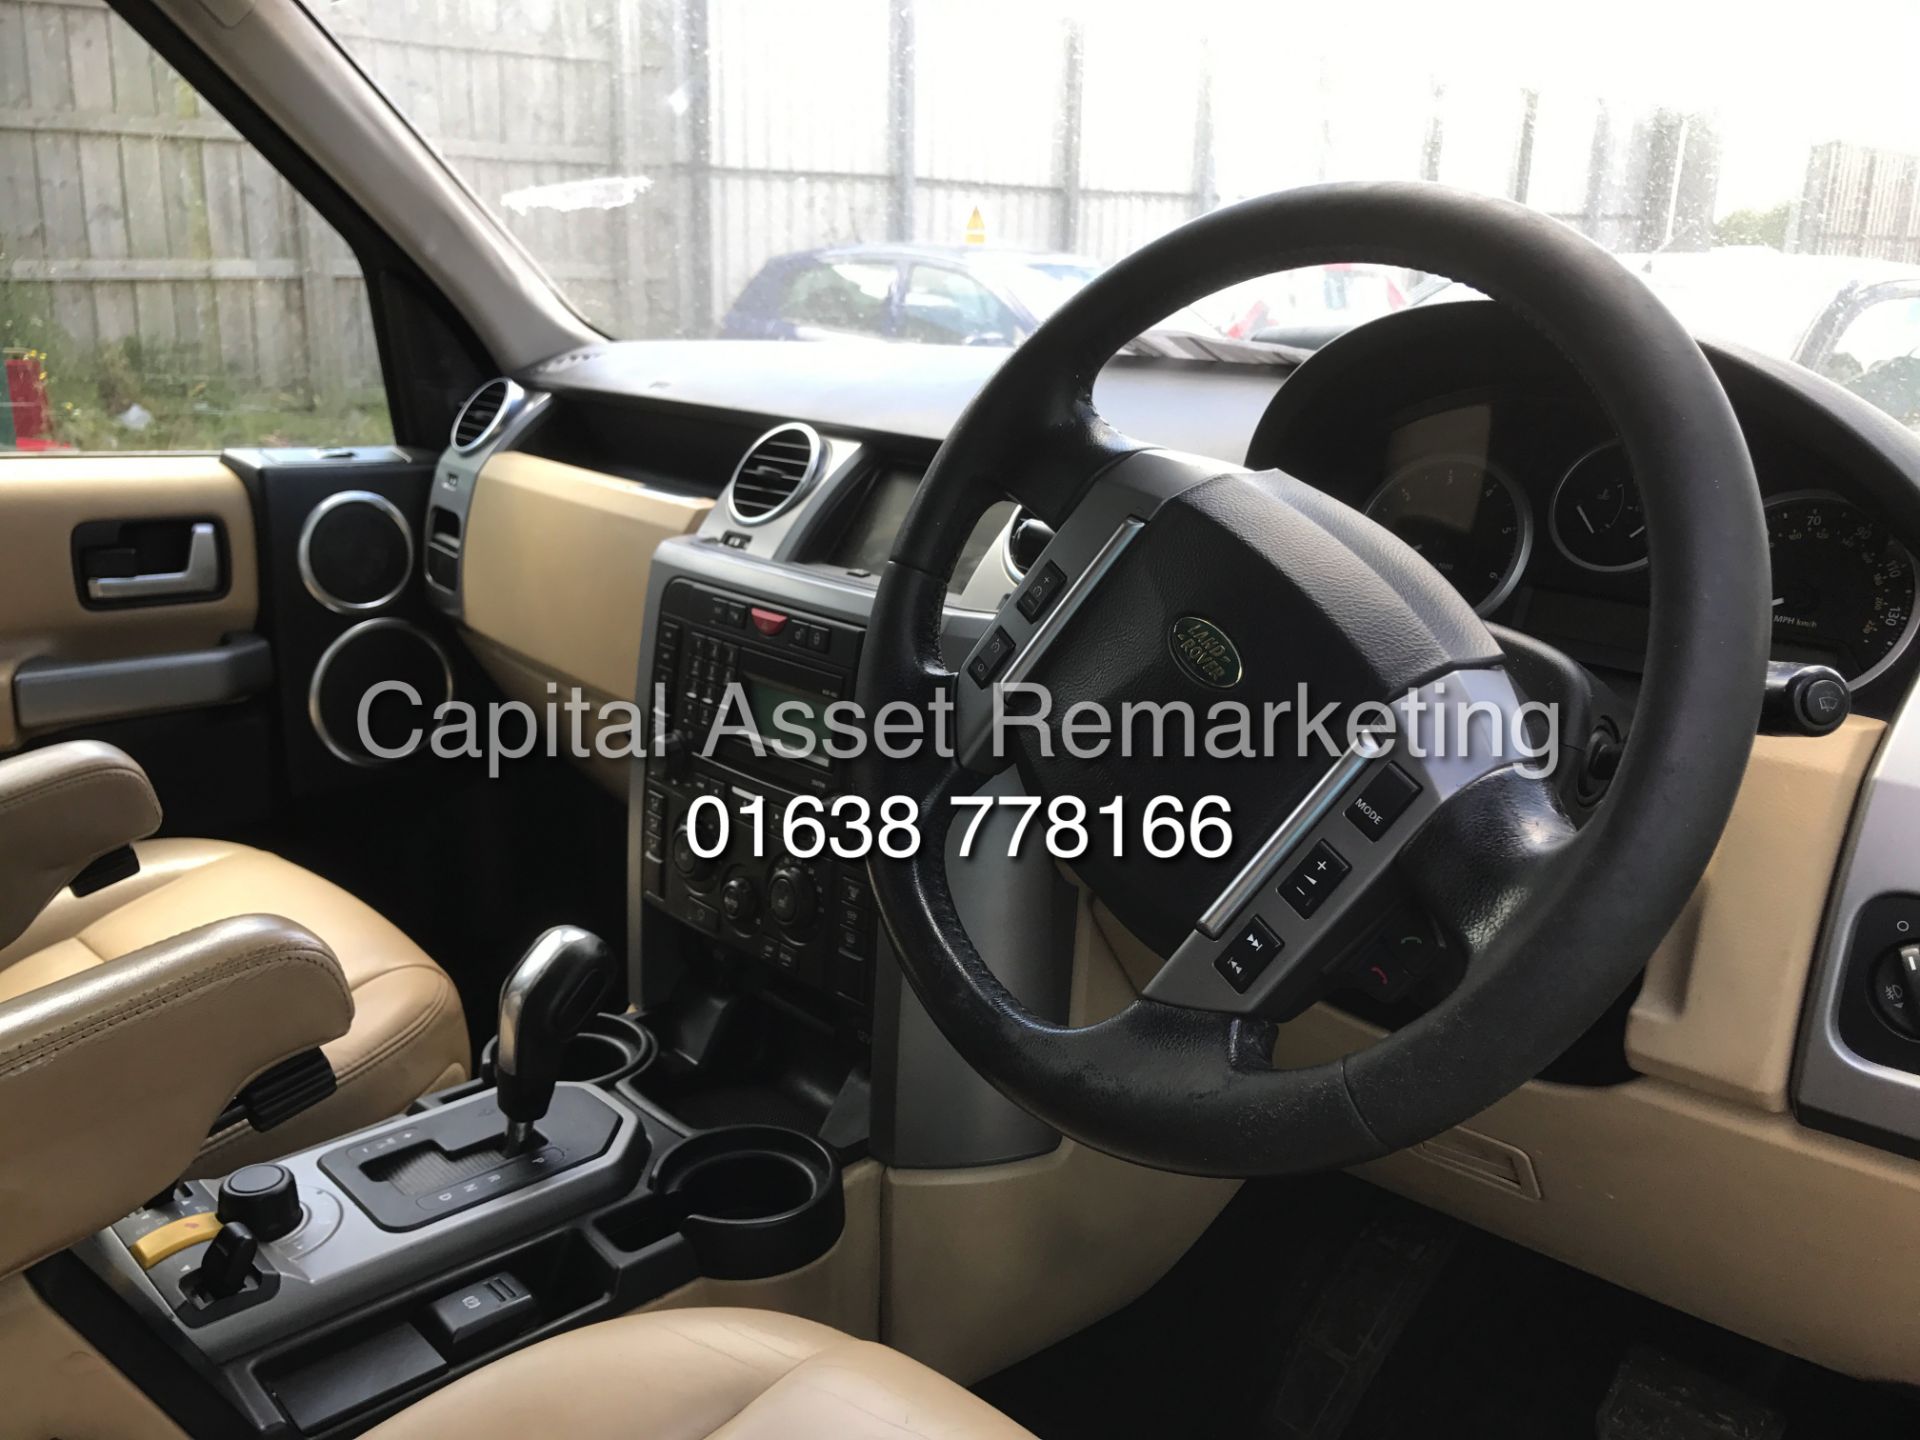 (ON SALE) LANDROVER DISCOVERY 3 "TDV6 "HSE" AUTOMATIC (08 REG) BLACK - FSH - LEATHER - SAT NAV - - Image 9 of 16